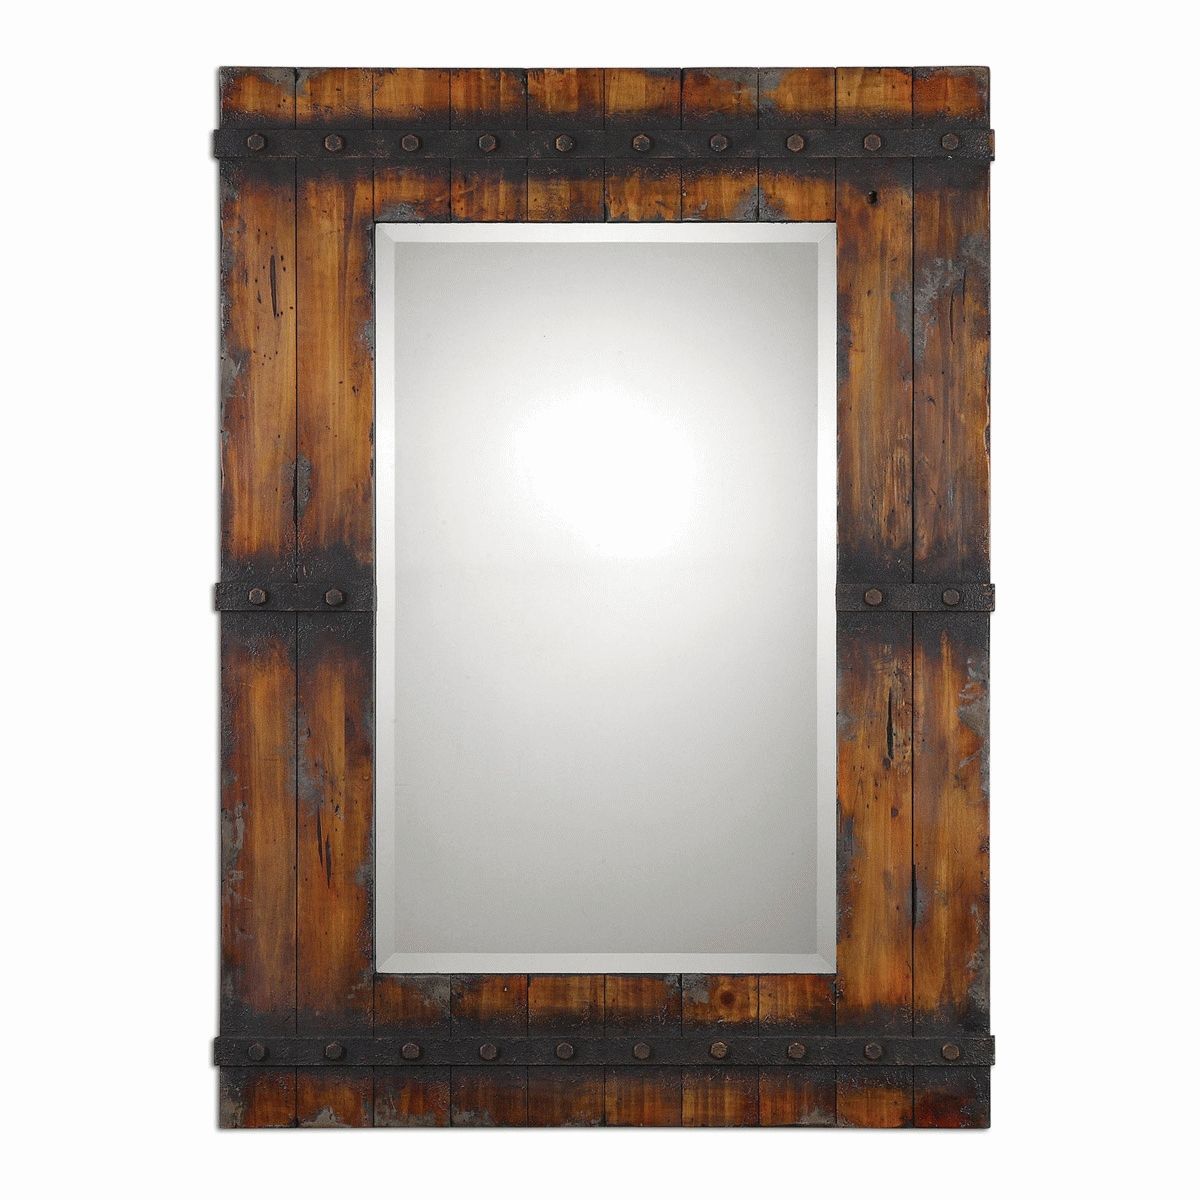 Western Mirrors Throughout Vintage Wood Mirrors (View 15 of 20)